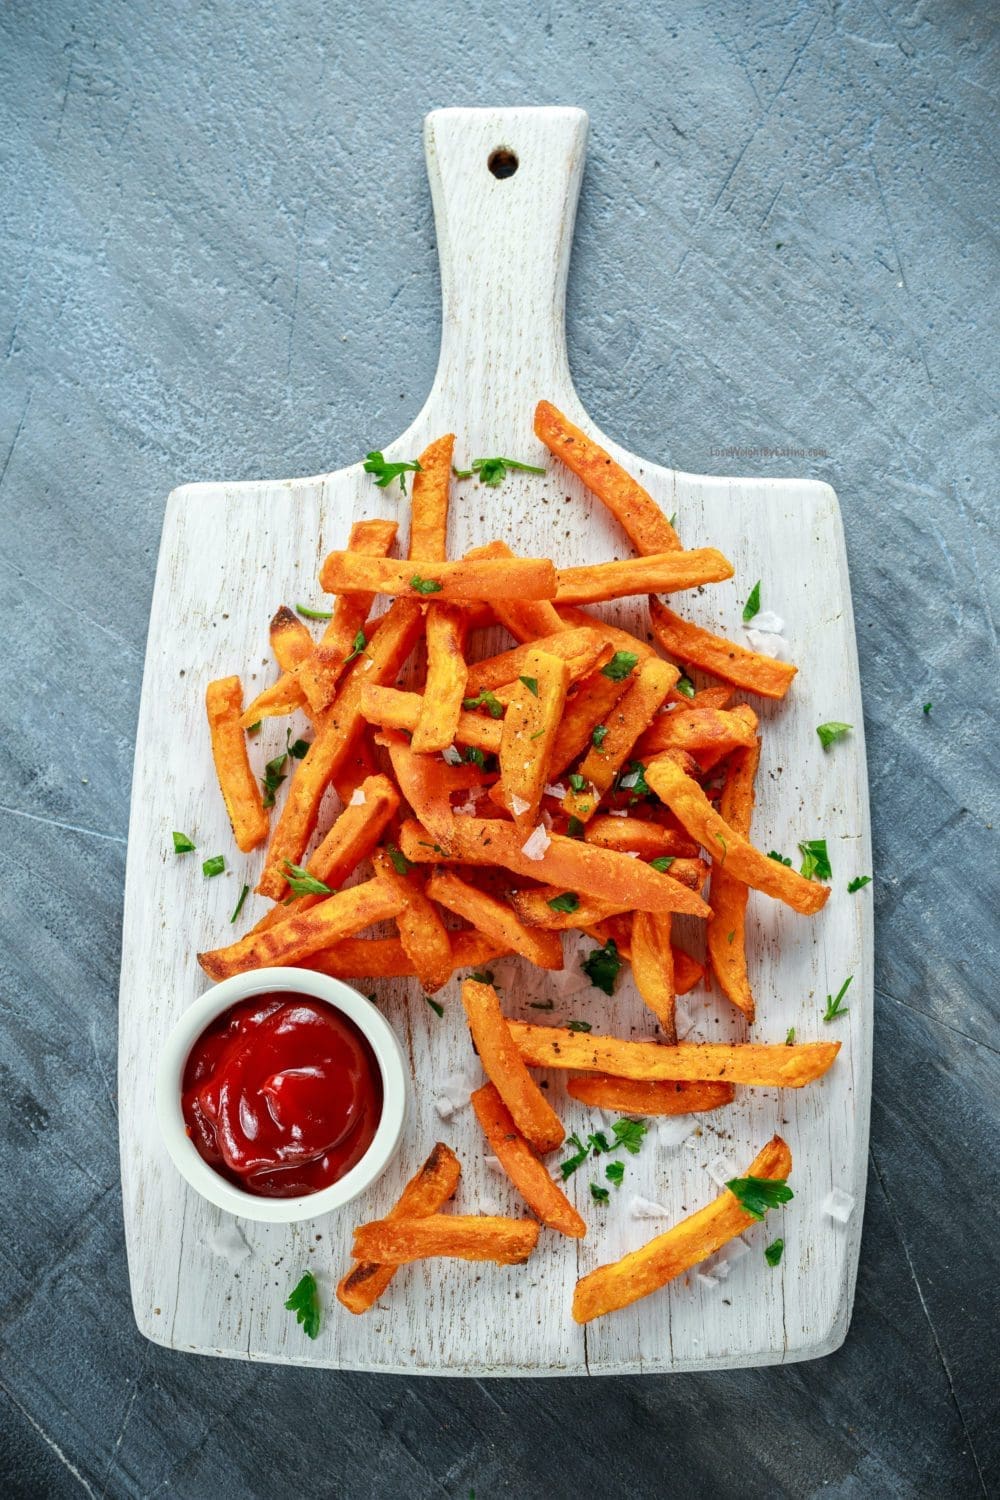 Oven Baked Sweet Potato Fries Recipe - 10 Easy Sides for Burgers